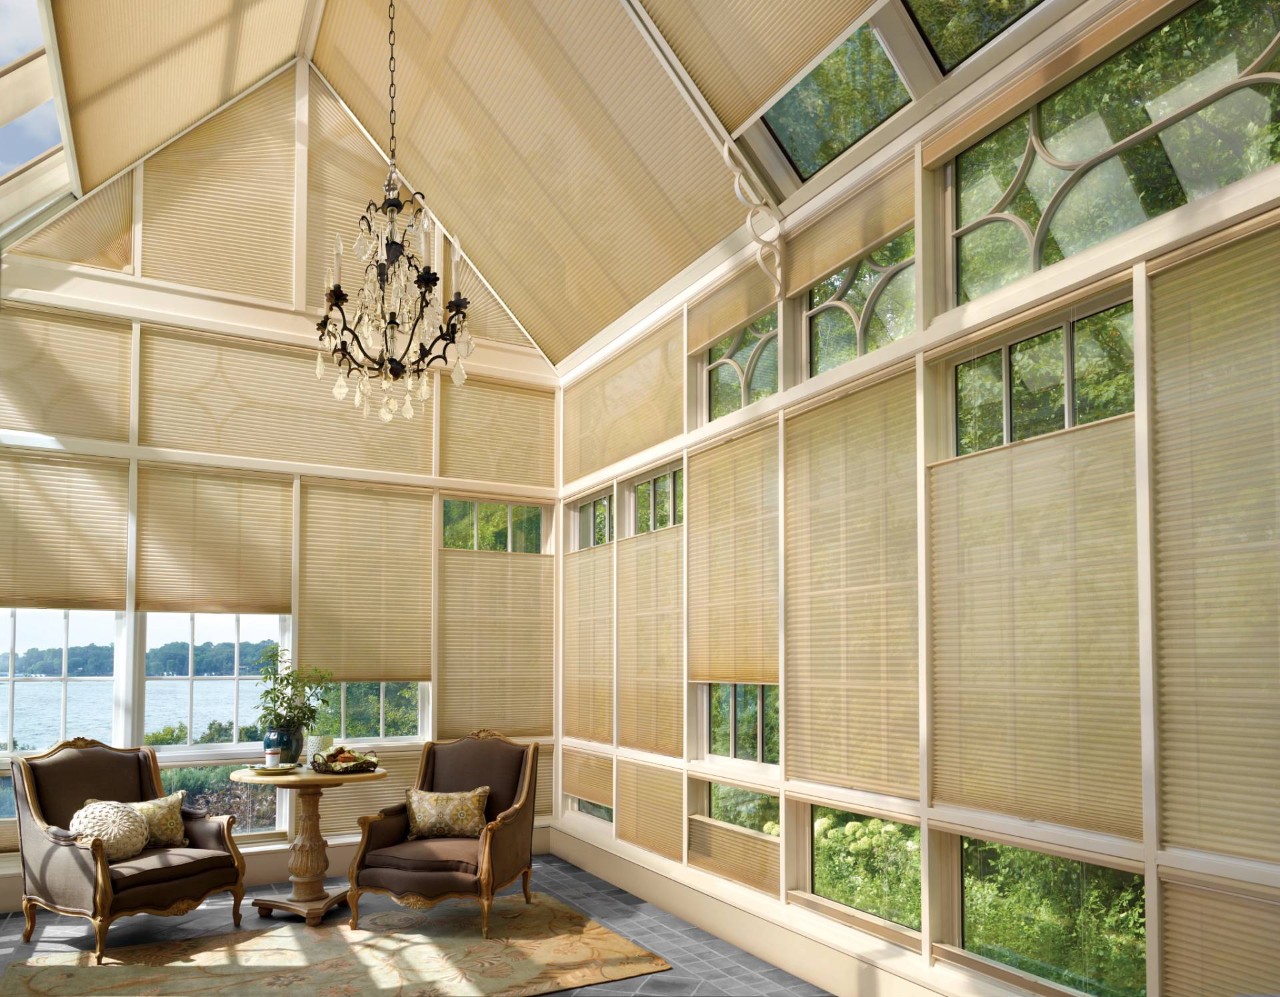 Find the best window treatments for skylights at Barrington Draperies and Shutters in Barrington, Illinois. Contact us today for more information.